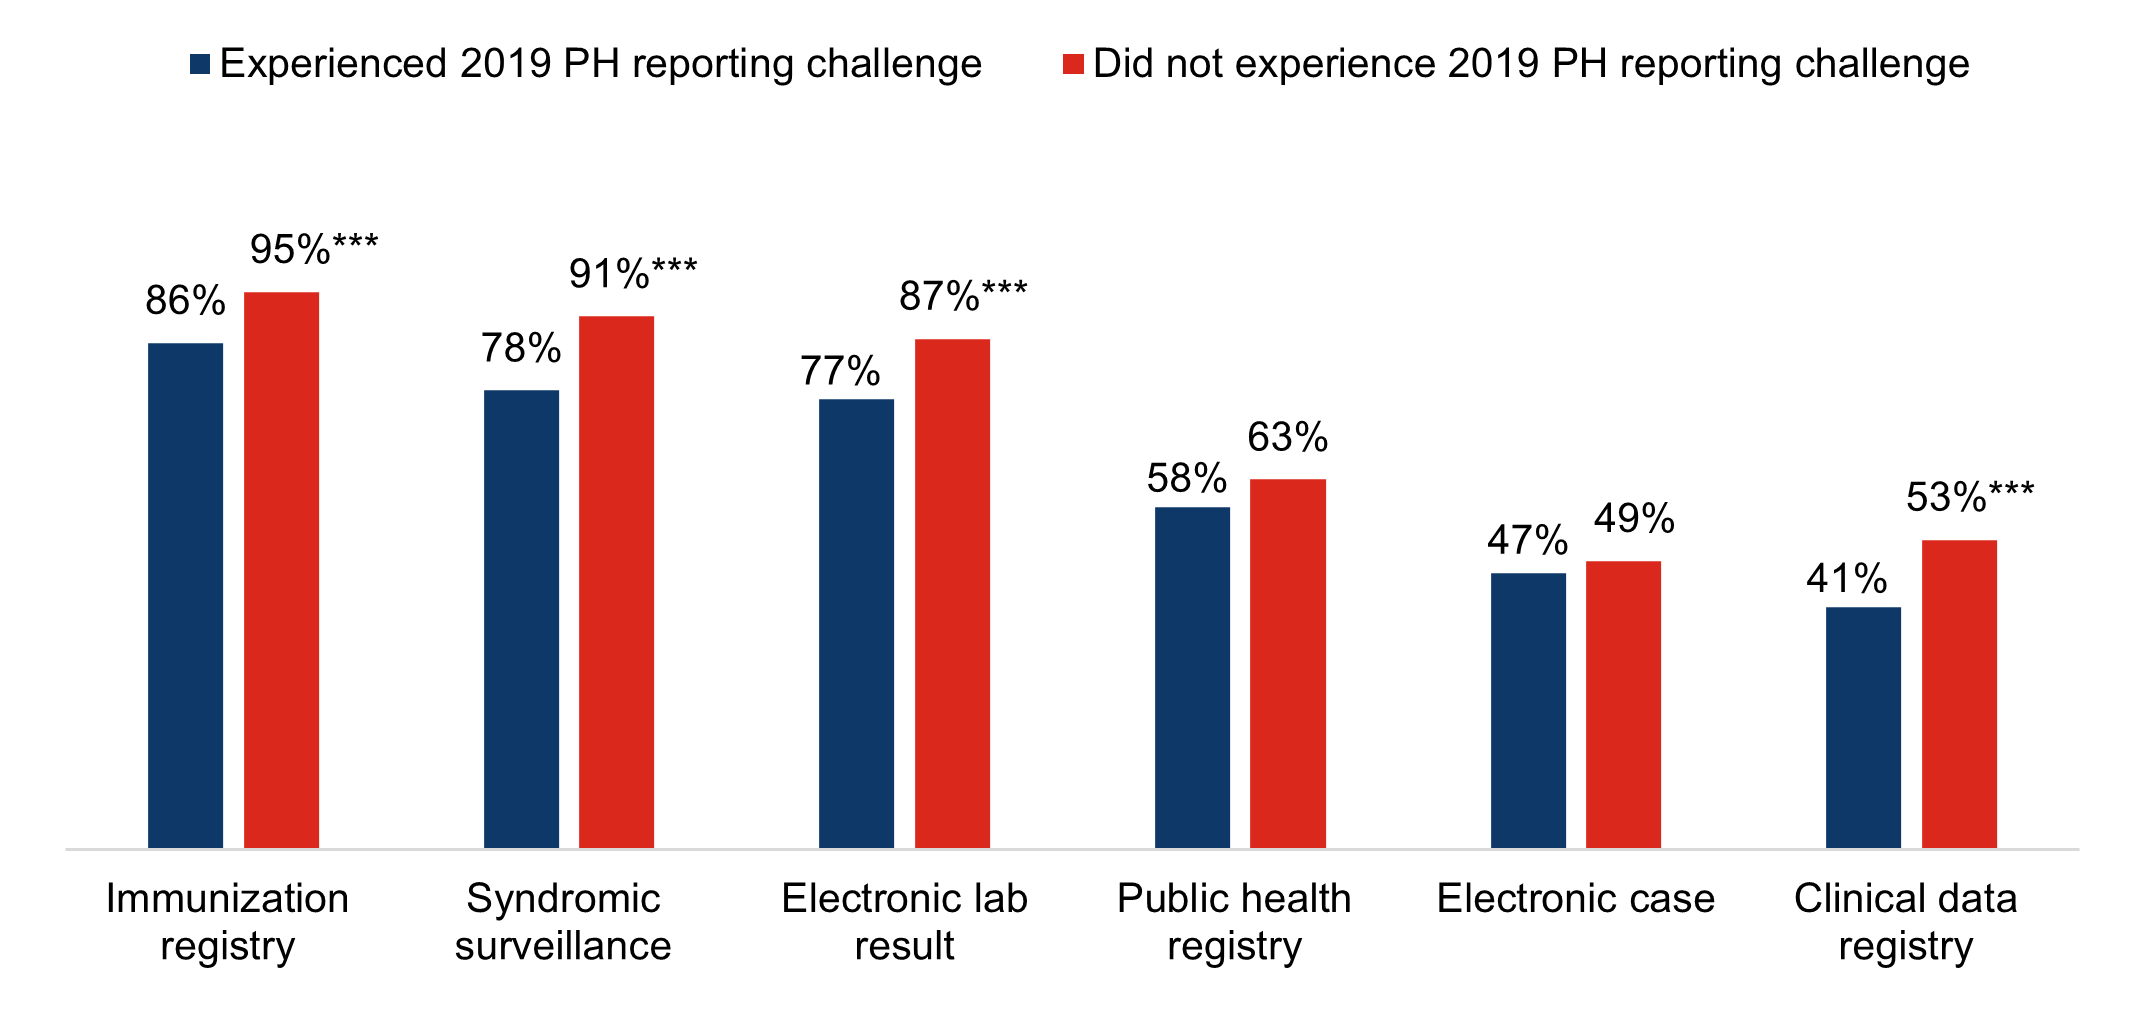 Figure 1 - Percent of non-federal acute care hospitals actively engaged in electronic public health reporting in 2021 by whether they experienced a public health reporting challenge in 2019. This figure contains a vertical clustered column chart showing the percent of hospitals actively engaged in electronic reporting of six different public health reporting types in 2021, by whether they experienced a public health reporting challenge in 2019.  The first cluster of columns shows that 86 percent of hospitals that experienced a public health reporting challenge in 2019 were actively engaged in electronic immunization registry reporting compared to 95 percent of hospitals that did not experience a public health reporting challenge in 2019 (a statistically significant difference).  The second cluster of columns shows that 78 percent of hospitals that experienced a public health reporting challenge in 2019 were actively engaged in electronic syndromic surveillance reporting compared to 91 percent of hospitals that did not experience a public health reporting challenge in 2019 (a statistically significant difference).  The third cluster of columns shows that 77 percent of hospitals that experienced a public health reporting challenge in 2019 were actively engaged in electronic laboratory (lab) result reporting compared to 87 percent of hospitals that did not experience a public health reporting challenge in 2019 (a statistically significant difference).  The fourth cluster of columns shows that 58 percent of hospitals that experienced a public health reporting challenge in 2019 were actively engaged in electronic public health registry reporting compared to 63 percent of hospitals that did not experience a public health reporting challenge in 2019. The fifth cluster of columns shows that 47 percent of hospitals that experienced a public health reporting challenge in 2019 were actively engaged in electronic case reporting compared to 49 percent of hospitals that did not experience a public health reporting challenge in